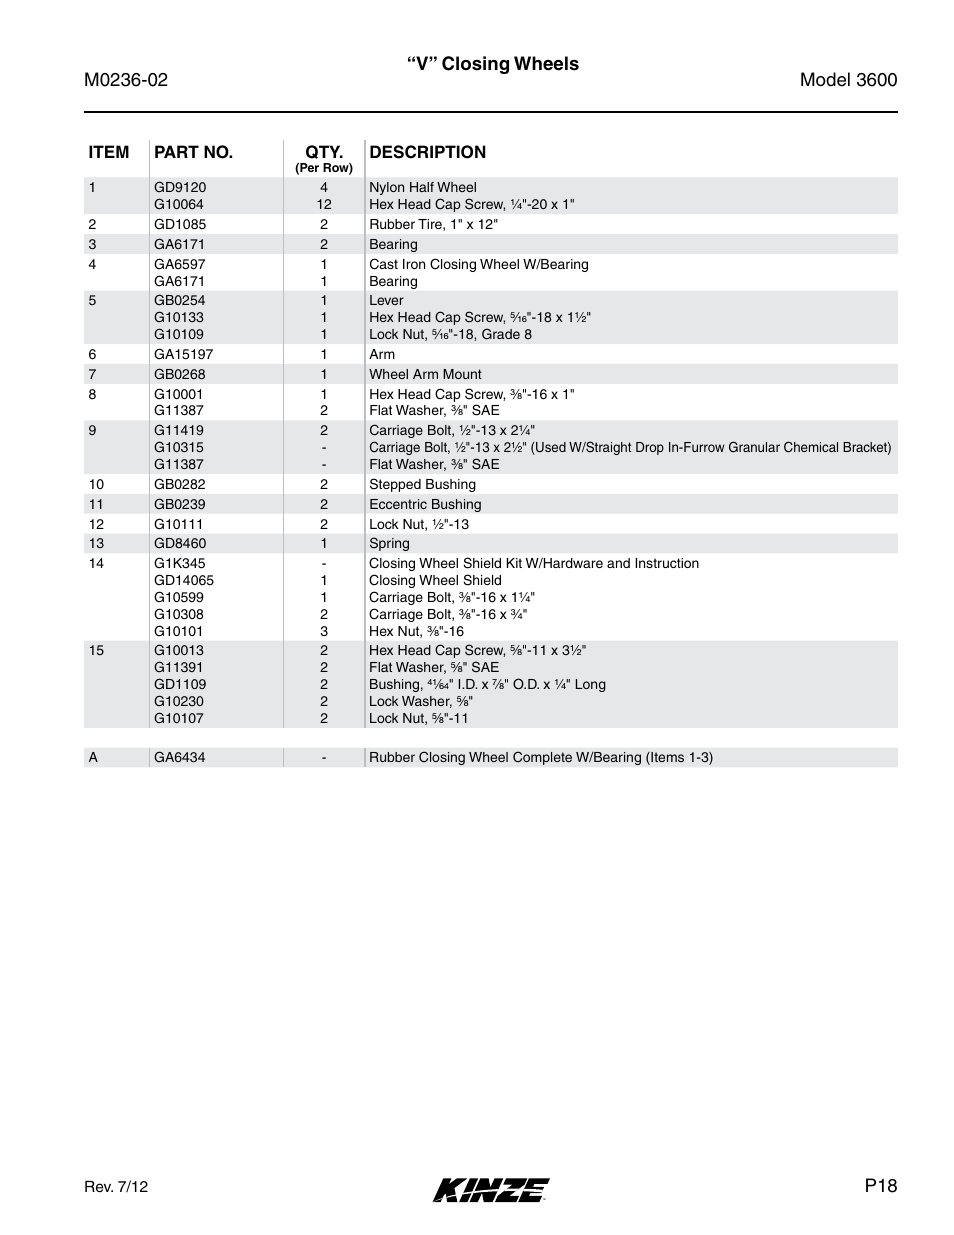 V” closing wheels | Kinze 3600 Lift and Rotate Planter Rev. 5/14 User Manual | Page 21 / 302